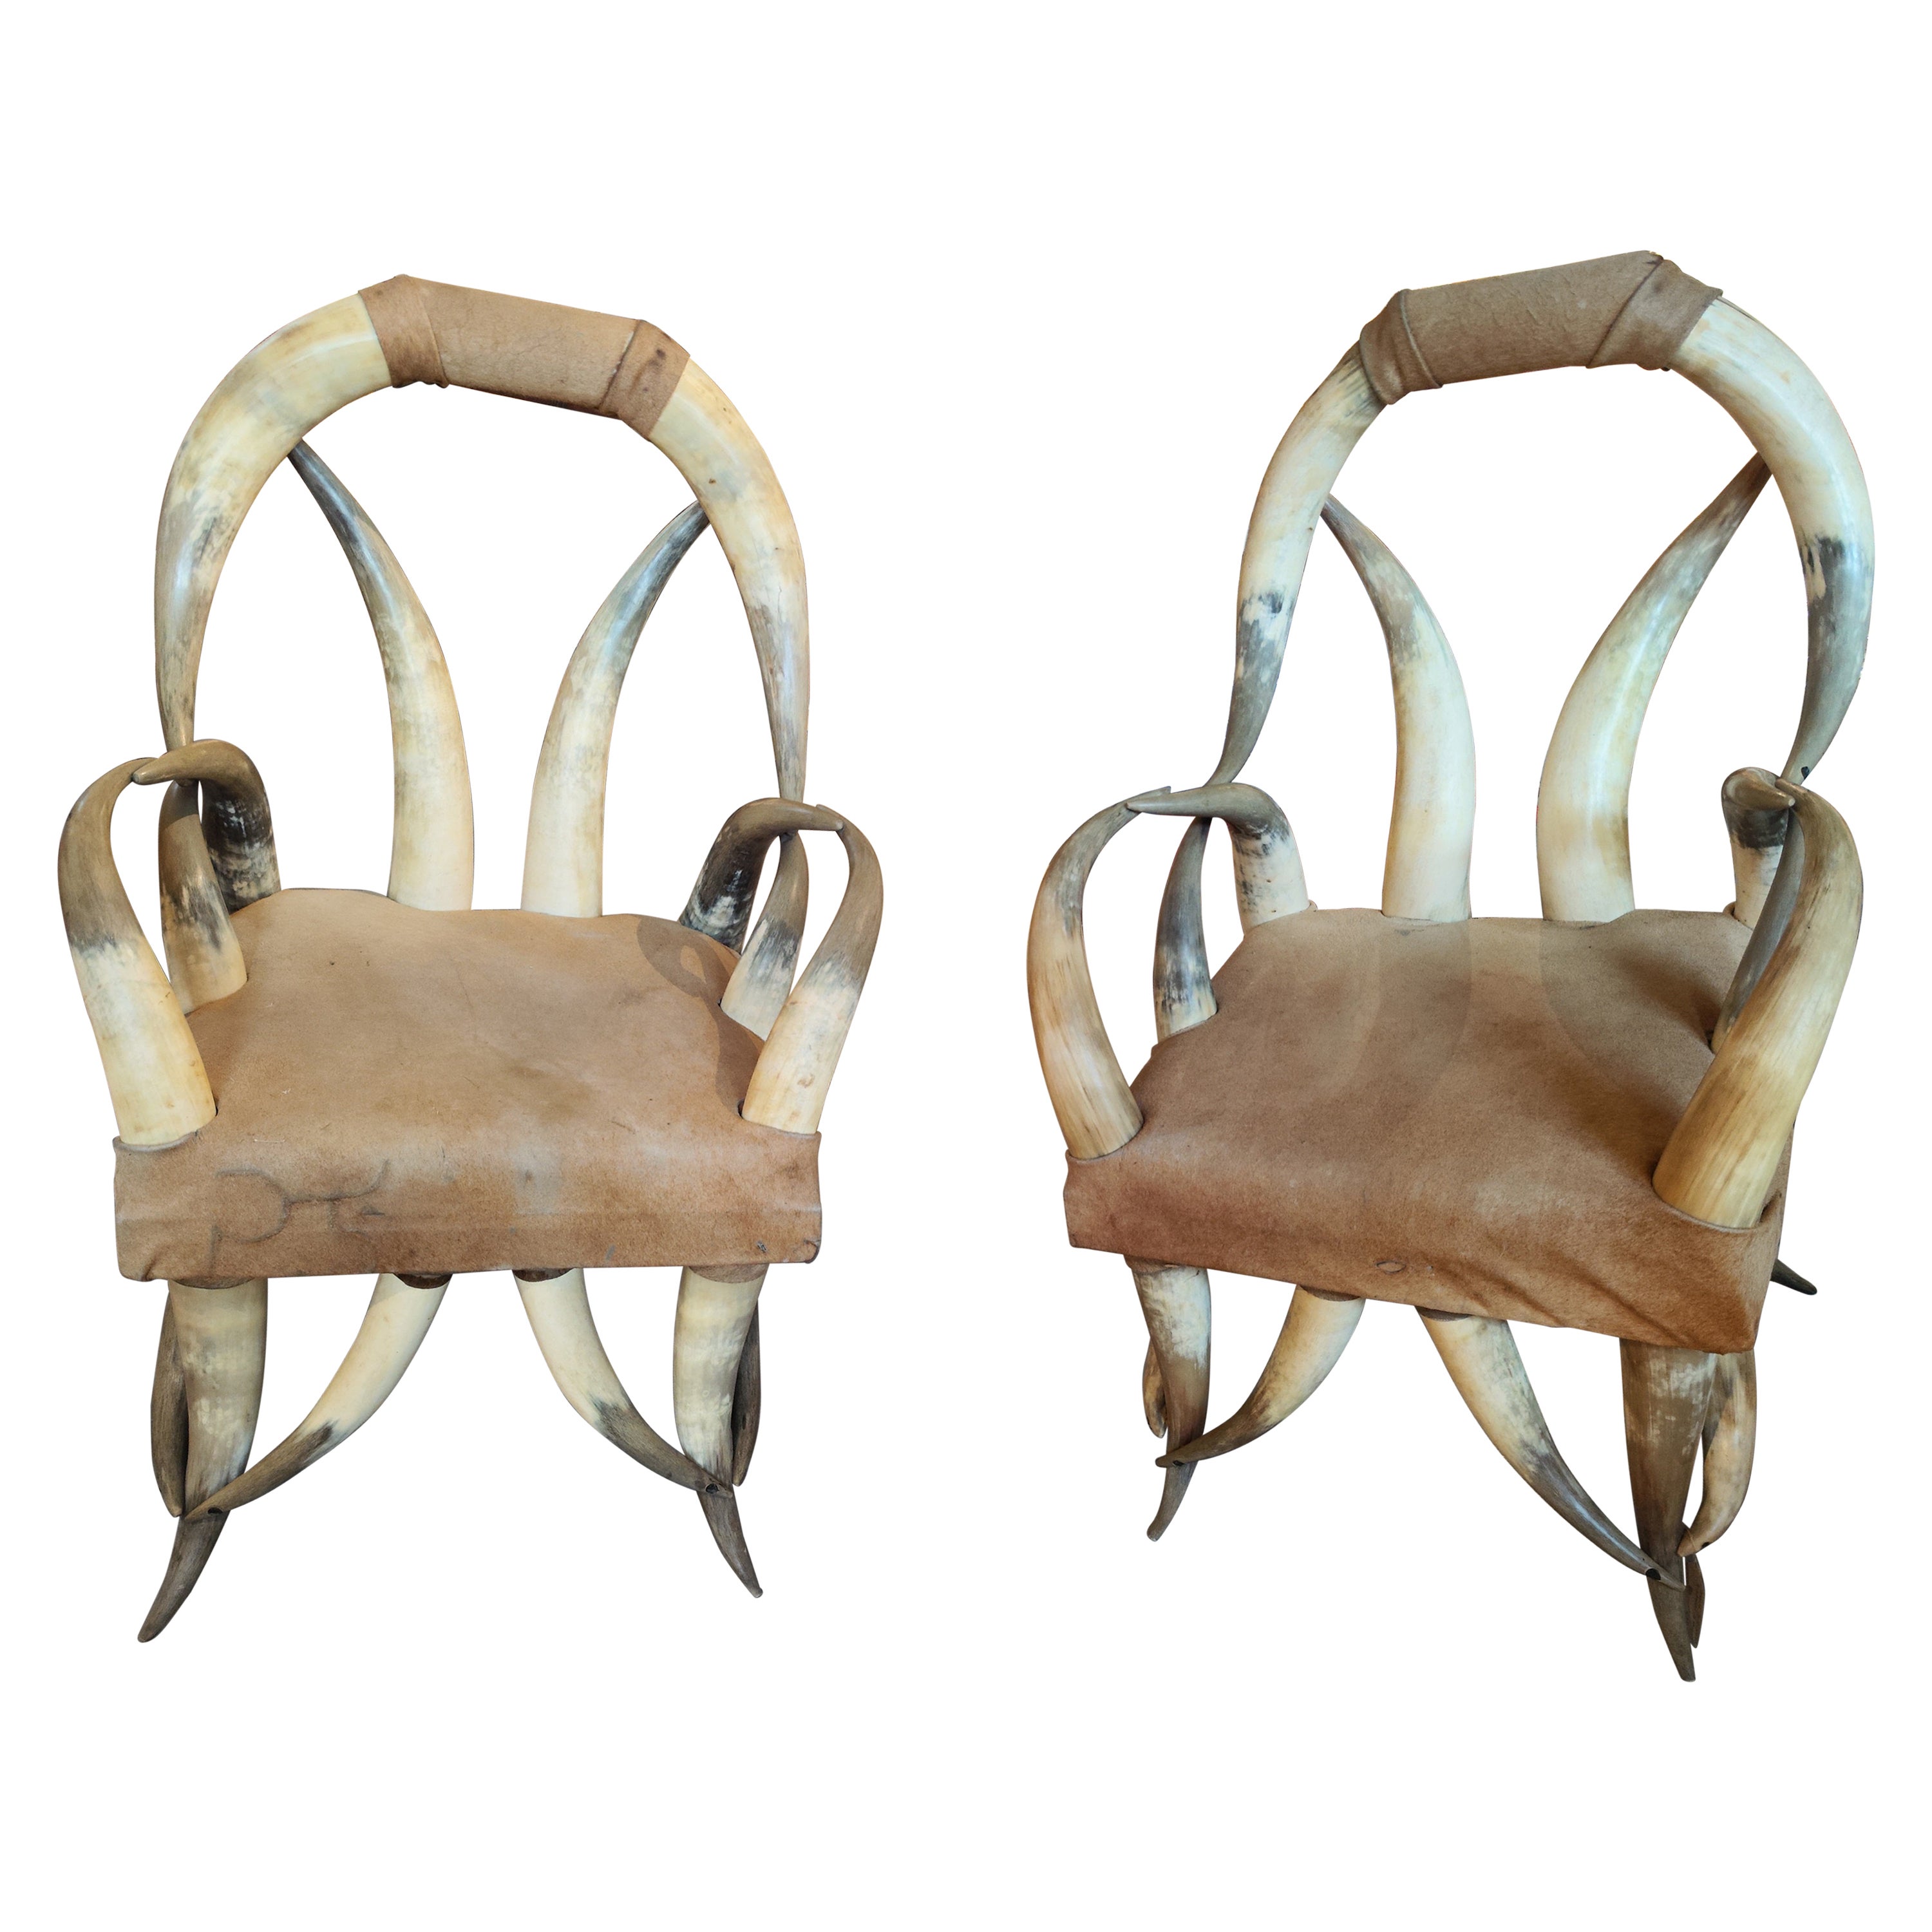 Early 20th Century Pair of Steer Horn Parlor Chair